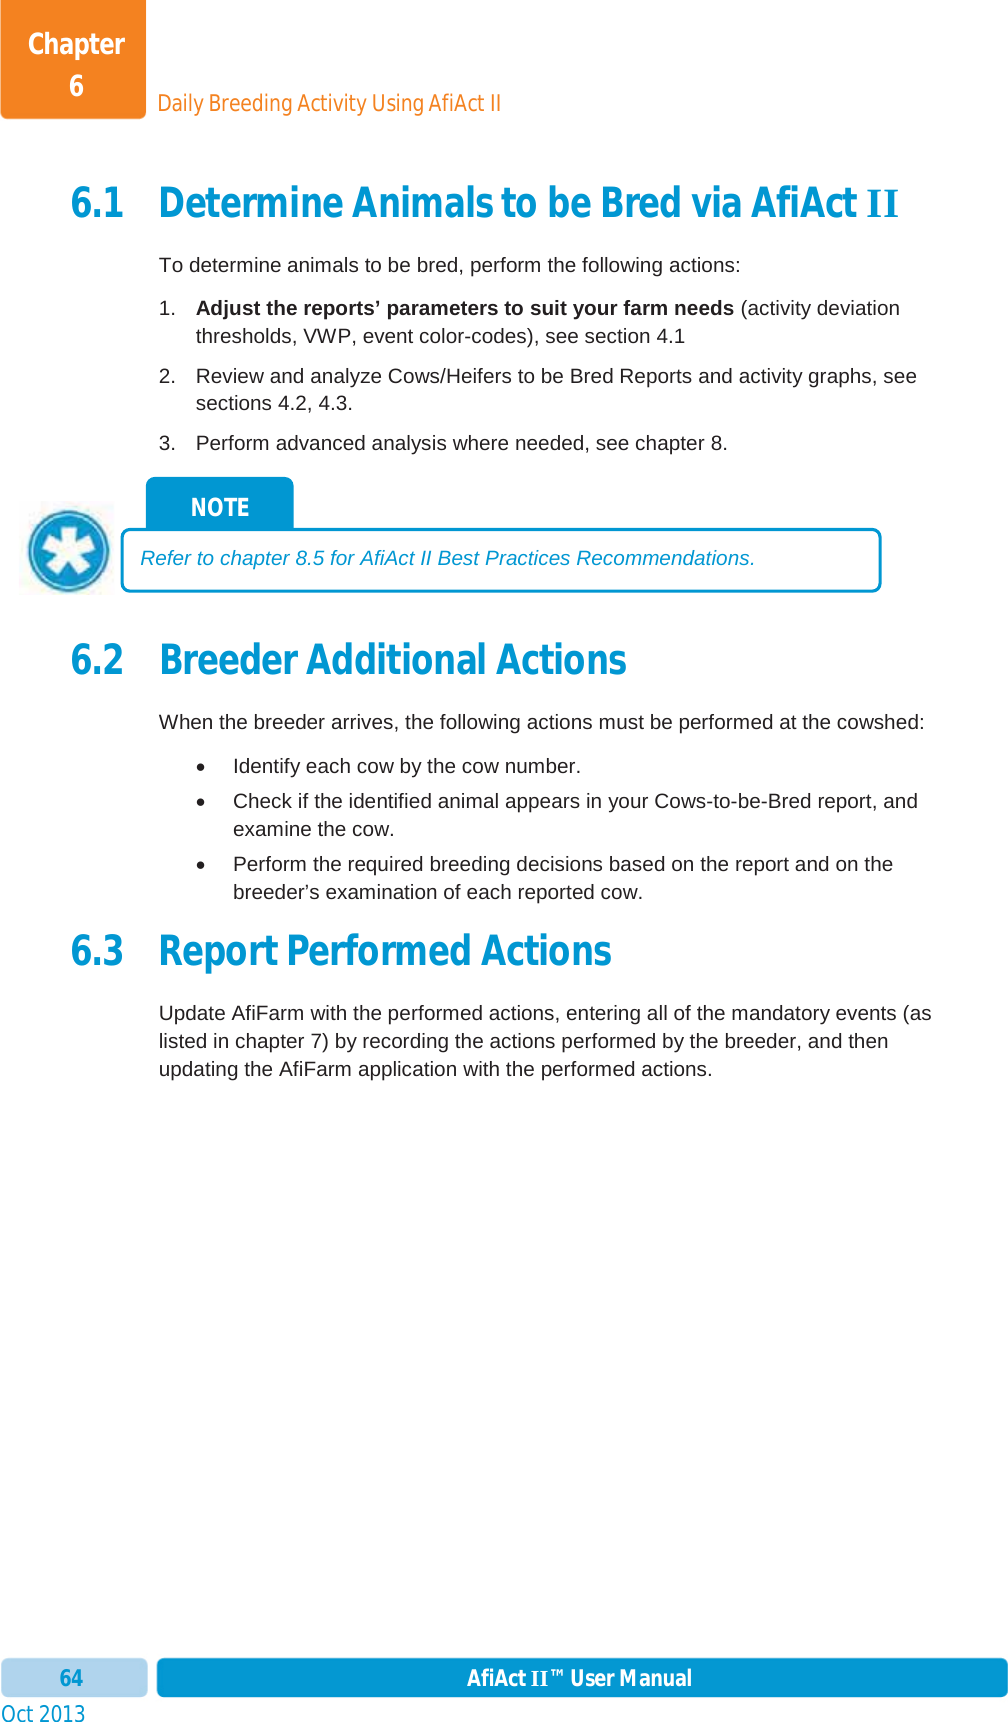 Oct 2013 AfiAct II™ User Manual64Daily Breeding Activity Using AfiAct IIChapter 66.1 Determine Animals to be Bred via AfiAct IITo determine animals to be bred, perform the following actions: 1.  Adjust the reports’ parameters to suit your farm needs (activity deviation thresholds, VWP, event color-codes), see section  4.1 2.  Review and analyze Cows/Heifers to be Bred Reports and activity graphs, see sections  4.2,  4.3. 3.  Perform advanced analysis where needed, see chapter  8.6.2 Breeder Additional Actions When the breeder arrives, the following actions must be performed at the cowshed: x  Identify each cow by the cow number. x  Check if the identified animal appears in your Cows-to-be-Bred report, and examine the cow. x  Perform the required breeding decisions based on the report and on the breeder’s examination of each reported cow. 6.3 Report Performed Actions Update AfiFarm with the performed actions, entering all of the mandatory events (as listed in chapter  7) by recording the actions performed by the breeder, and then updating the AfiFarm application with the performed actions. NOTE Refer to chapter  8.5 for AfiAct II Best Practices Recommendations. 